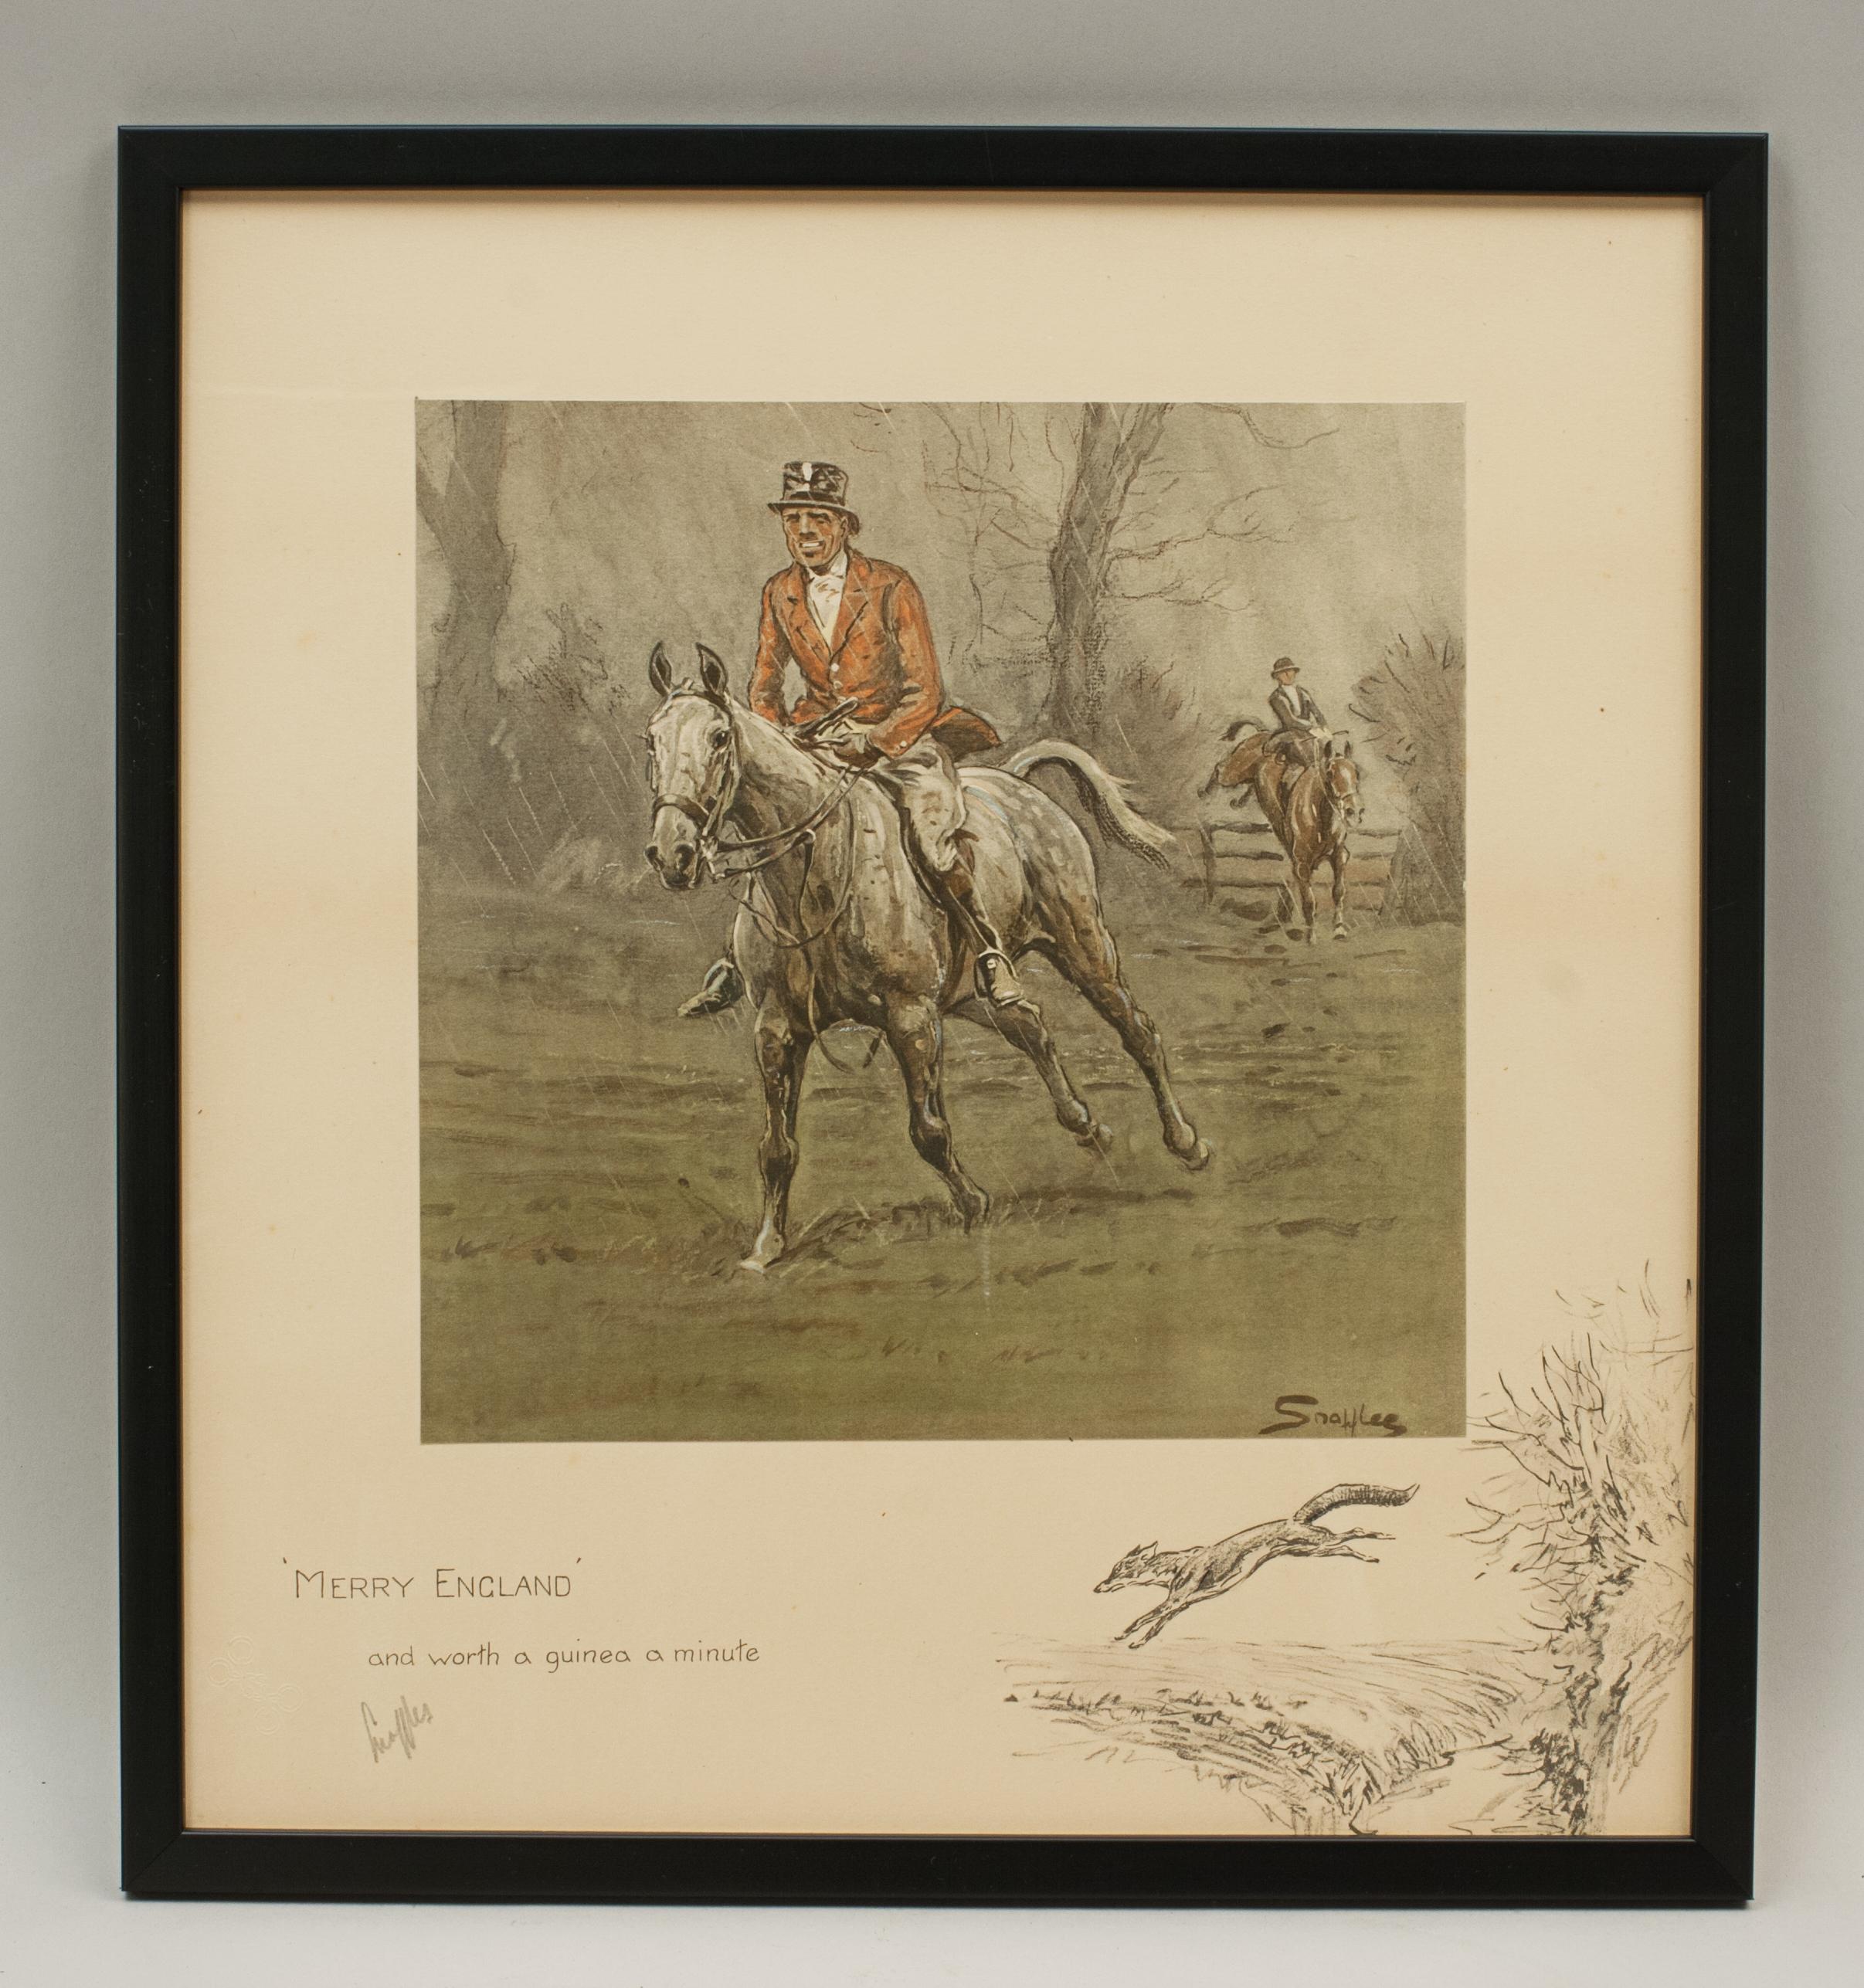 Vintage Snaffles Hunting Print, Merry England.
A hand coloured Snaffles photolithograph entitled 'Merry England' with secondary caption 